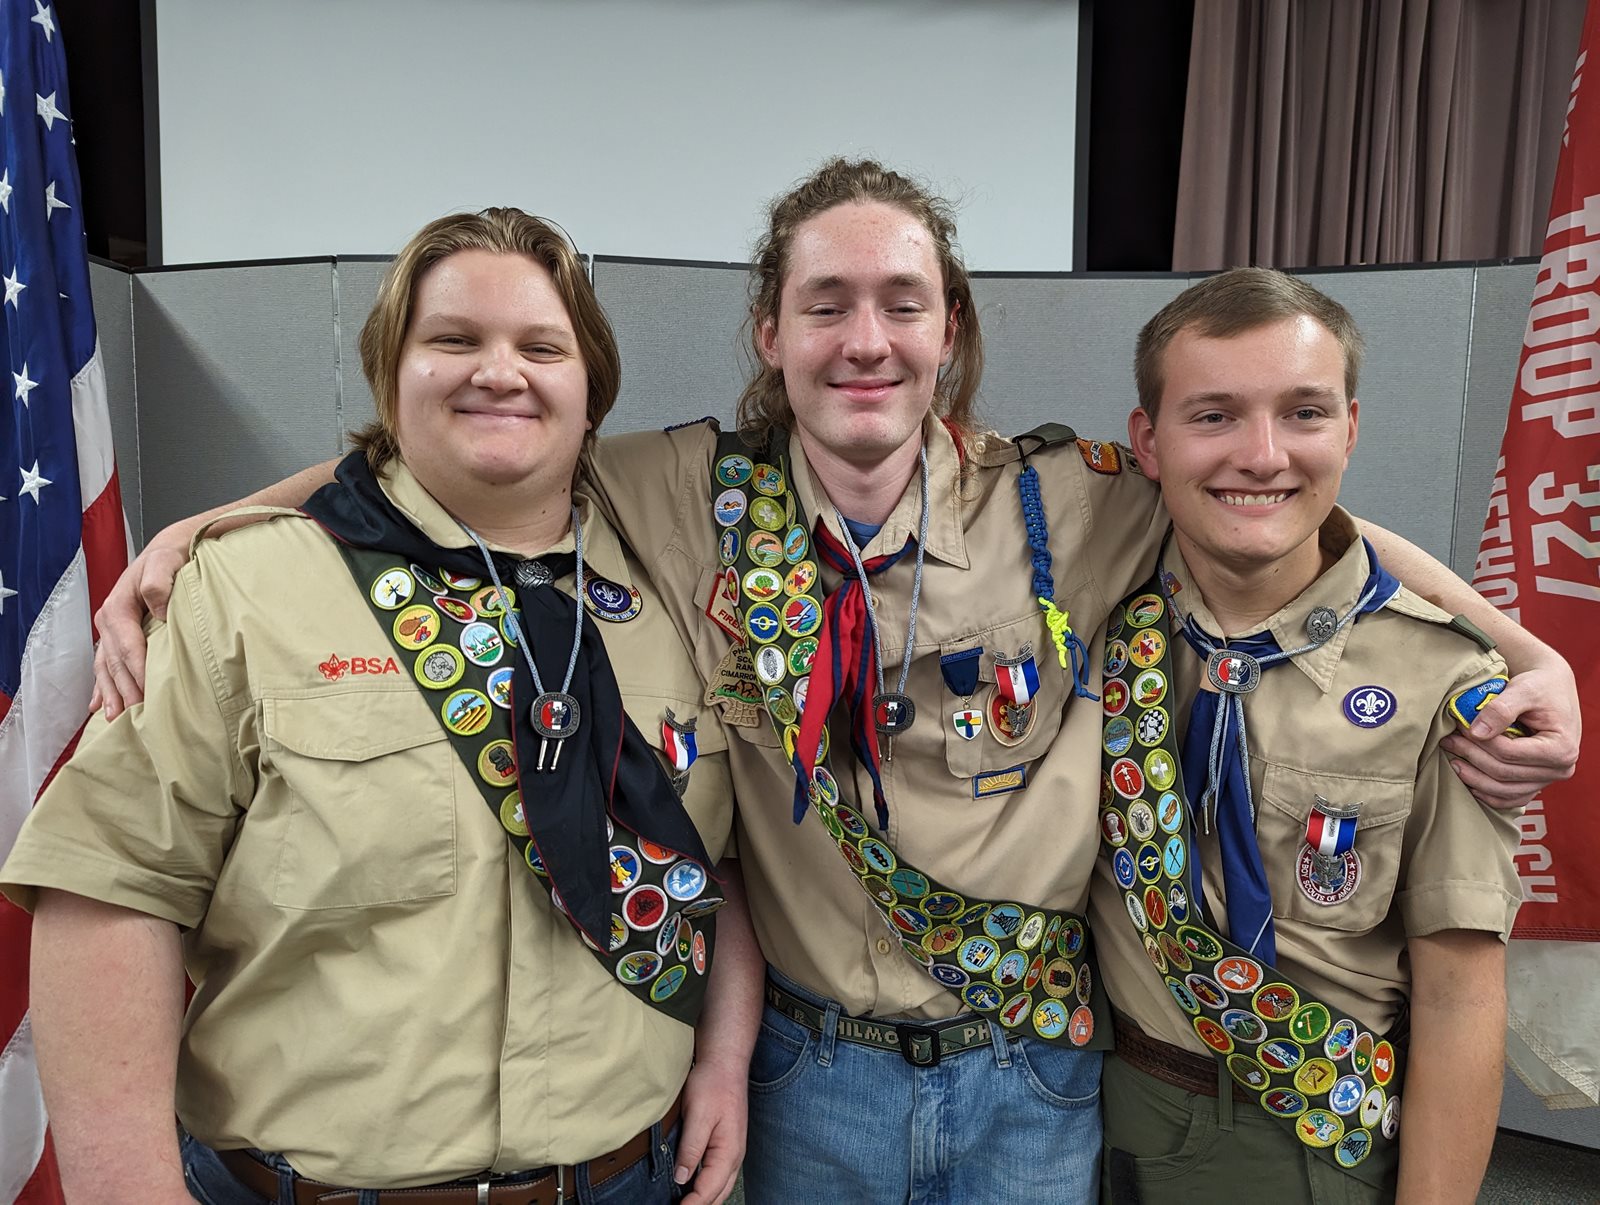 Eagle Court-of-Honor for Three Scouts